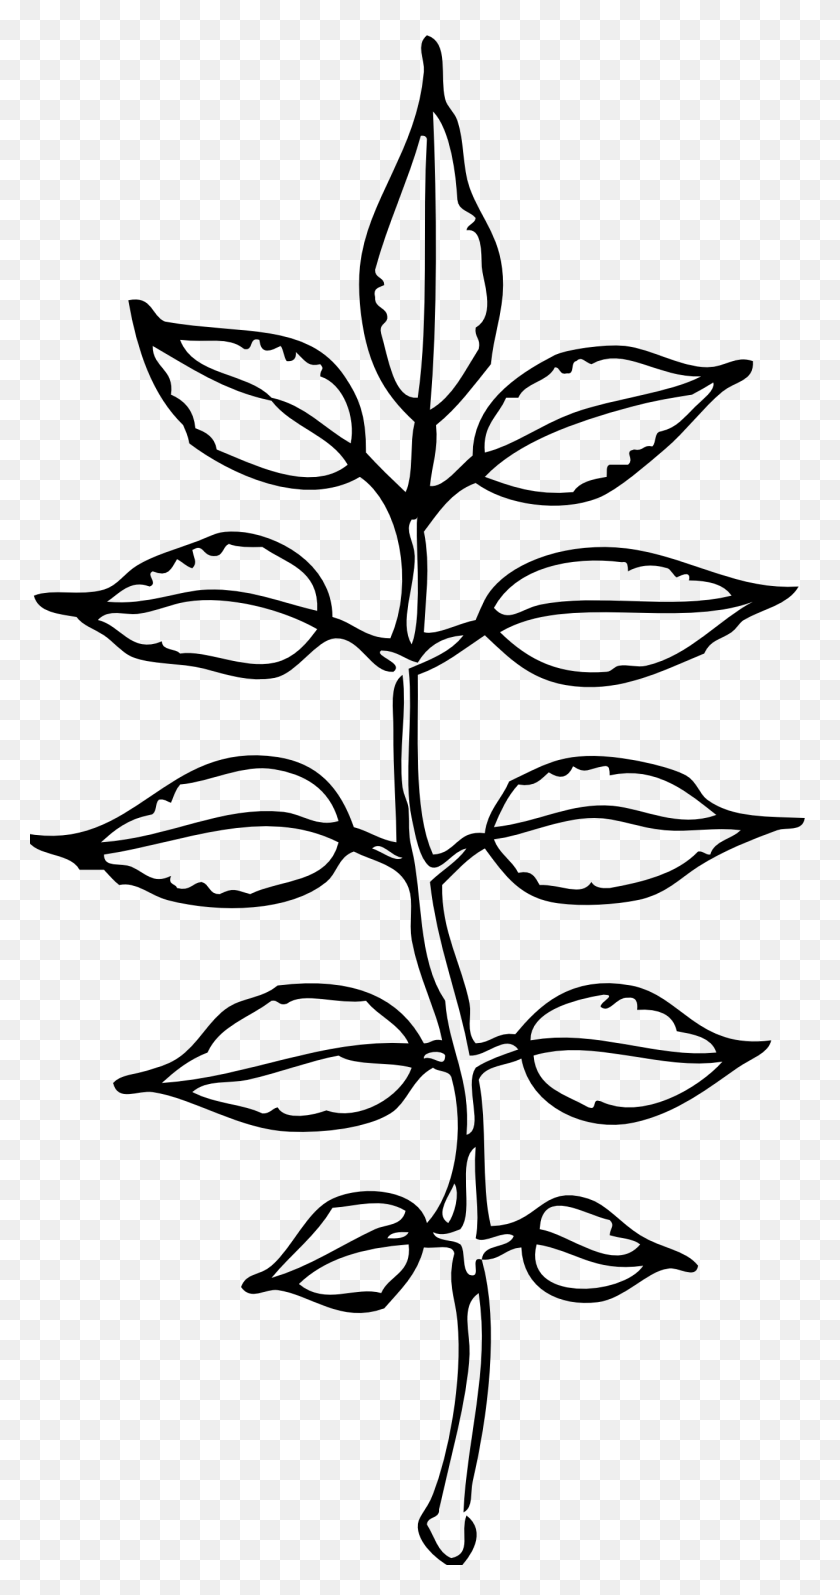 1331x2620 Leaves Black And White Pile Leaves Clip Art Black And White - Quilt Clipart Black And White